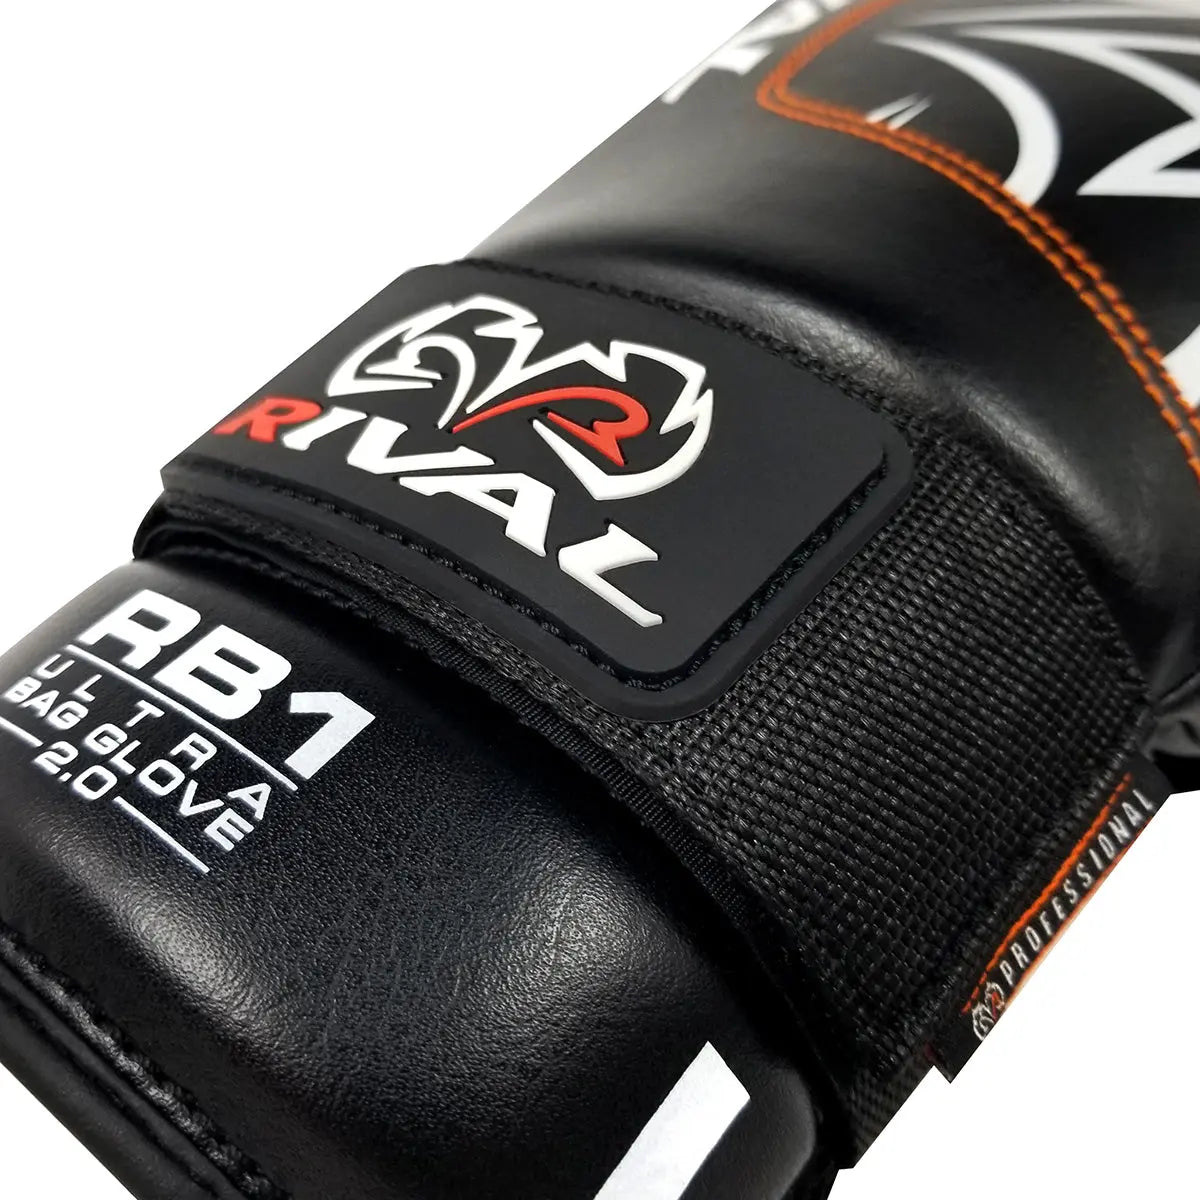 Rival Boxing RB1 Ultra Bag Gloves 2.0